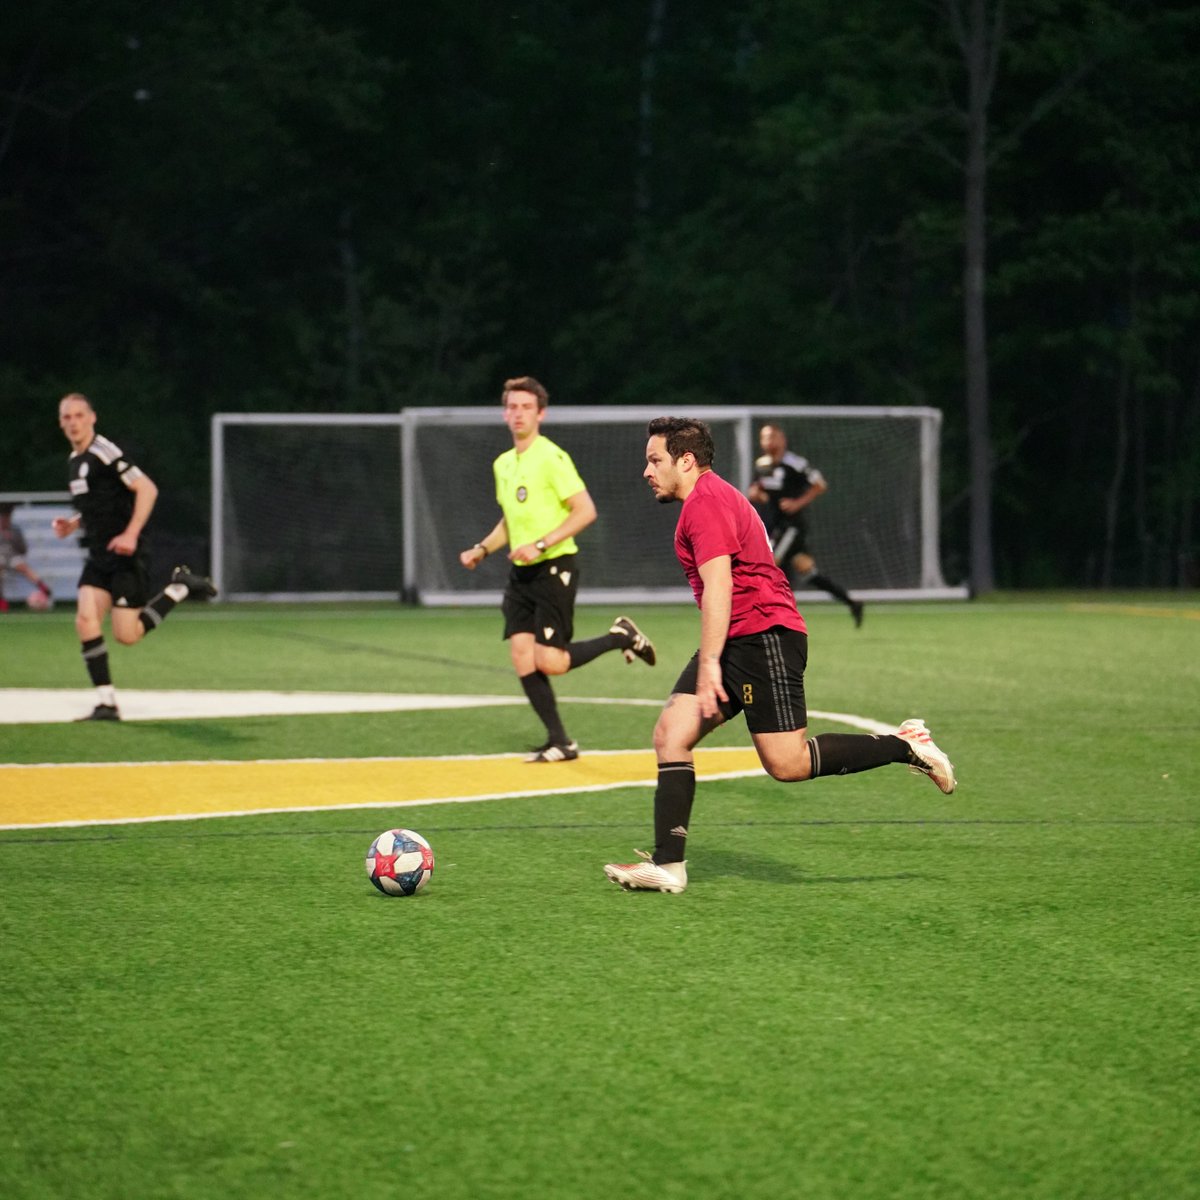 Summer may be nearing an end, but there's still plenty of time to enjoy our pitch with a beautiful game of soccer!⚽

If you're looking to book our field for a match while the weather is still warm, email ron@jdgpark.ca or send us a DM!

#JDGPark #OttawaSoccer #MyOttawa #Soccer